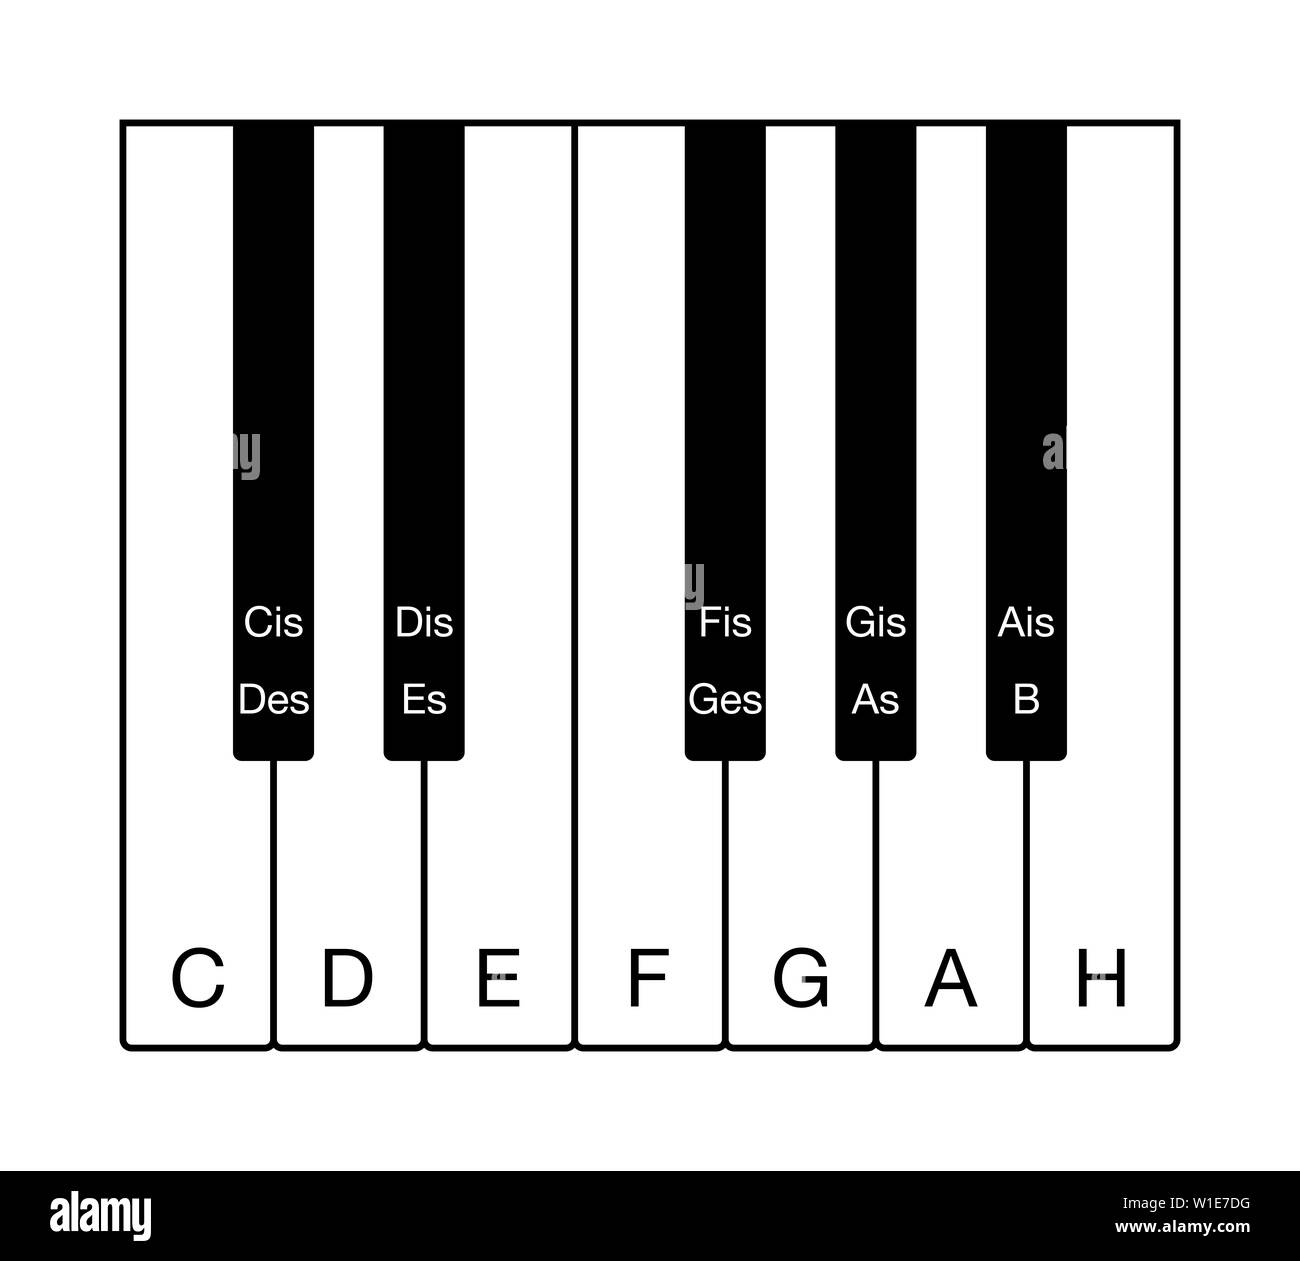 https://c8.alamy.com/comp/W1E7DG/twelve-tone-chromatic-scale-on-a-keyboard-one-octave-of-notes-of-the-western-musical-scale-twelve-keys-from-c-to-h-with-german-note-names-W1E7DG.jpg